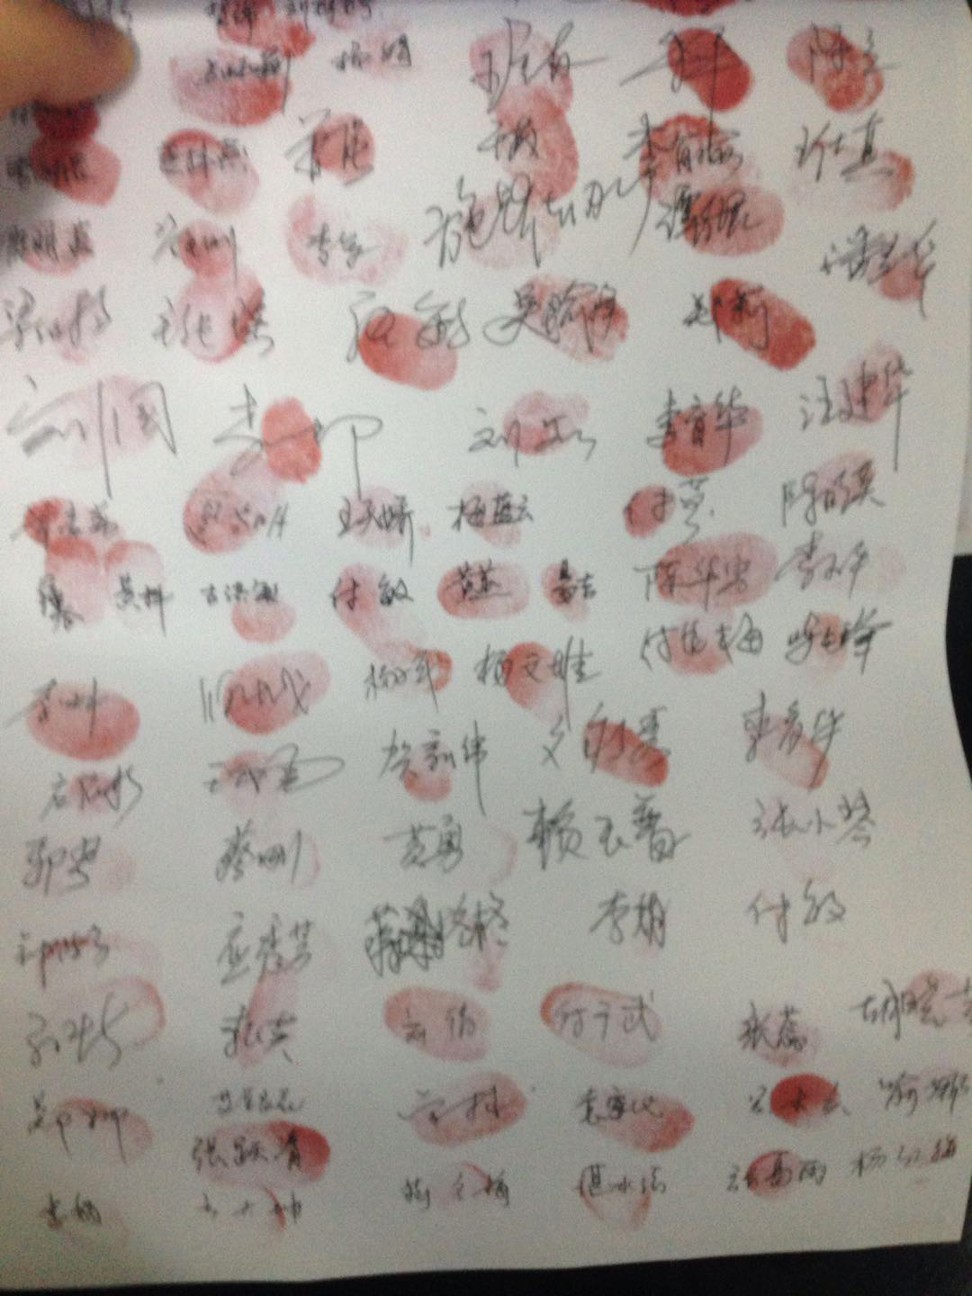 Teachers signed a petition and presented it to authorities as part of their demands for better pay. Photo: Handout